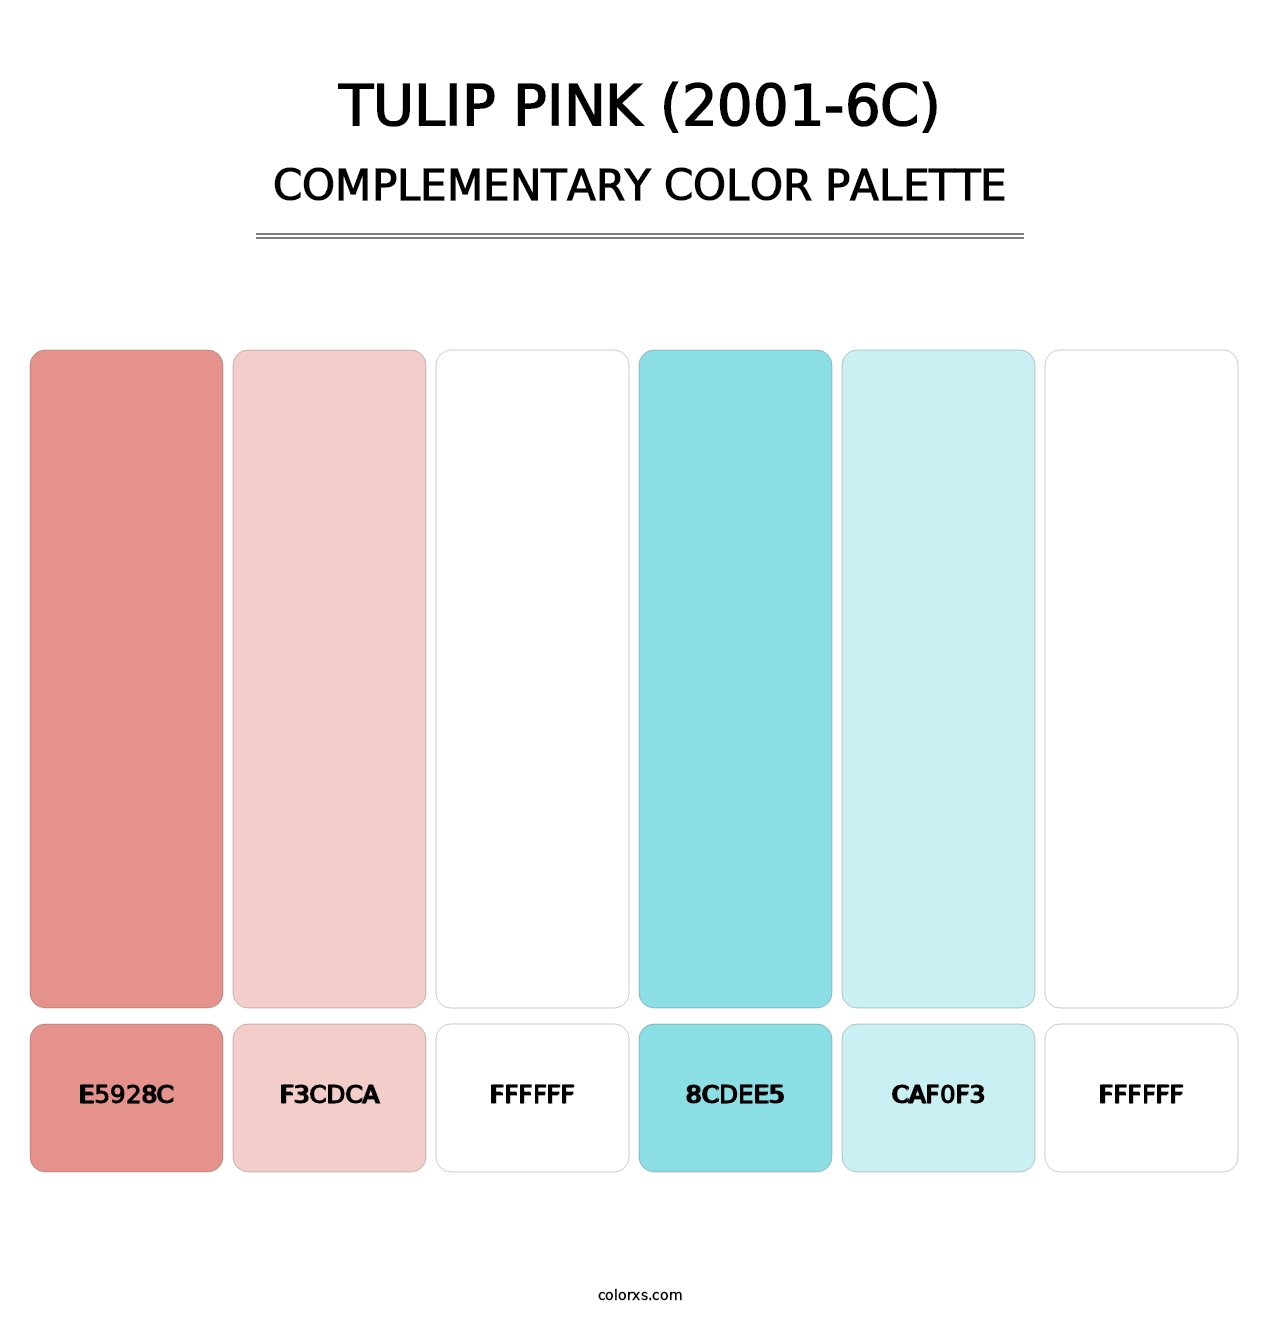 Tulip Pink (2001-6C) - Complementary Color Palette